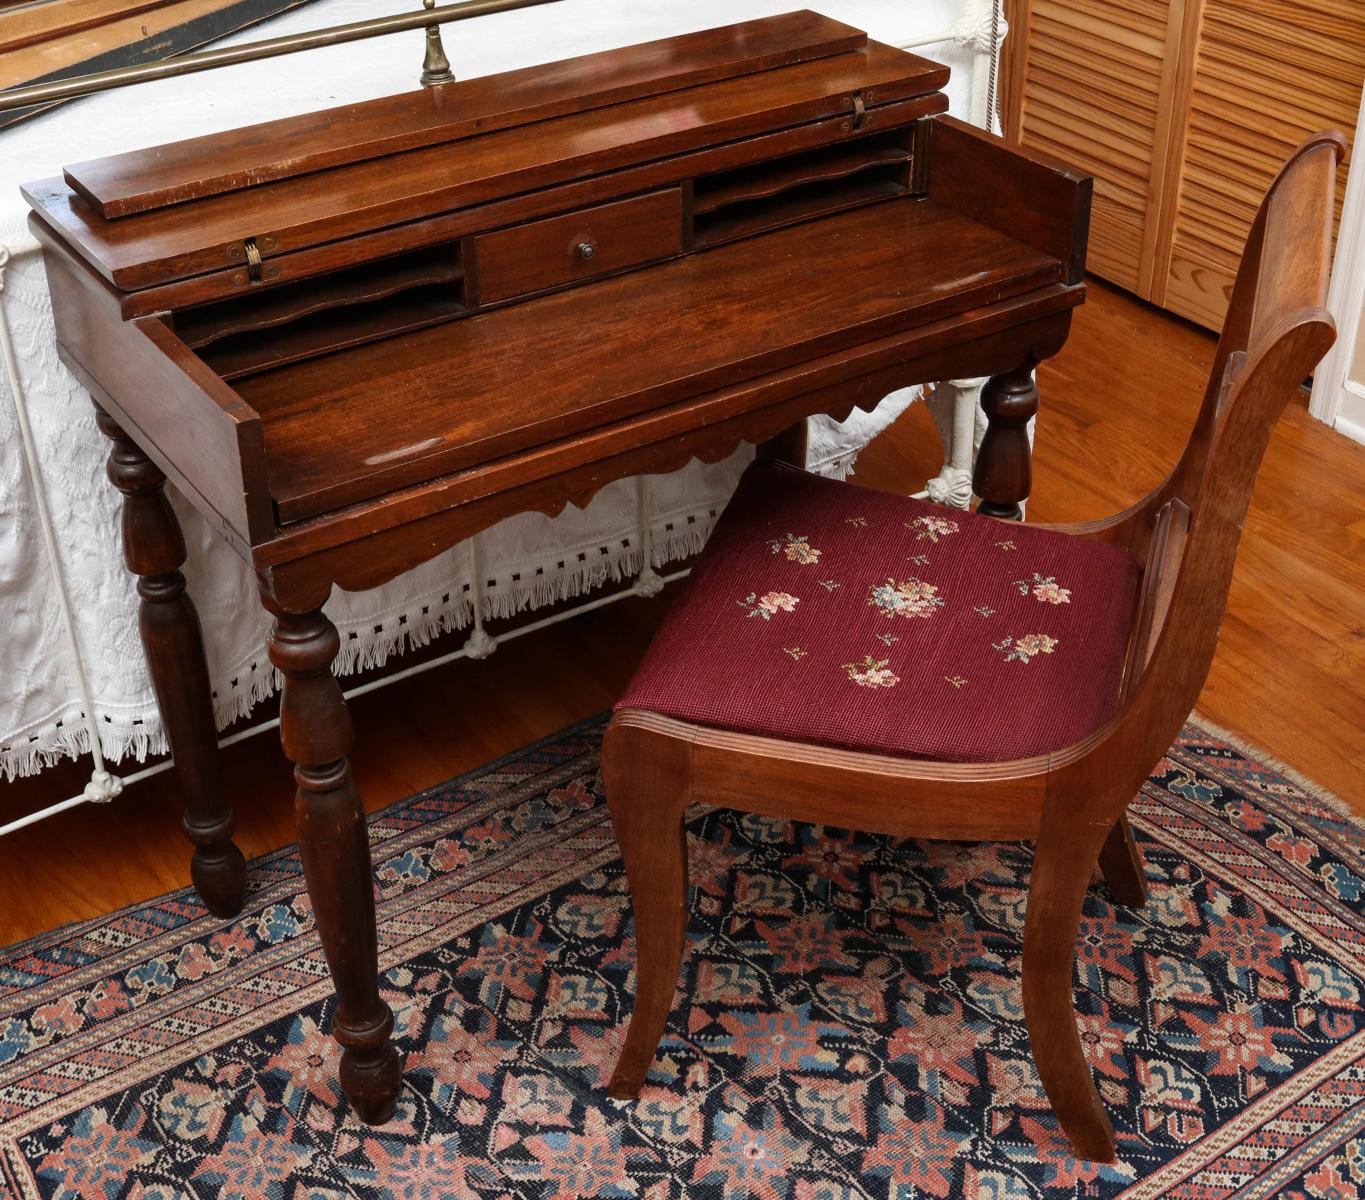 A 1940s SPINET DESK WITH NEEDLEPOINT SEAT CHAIR